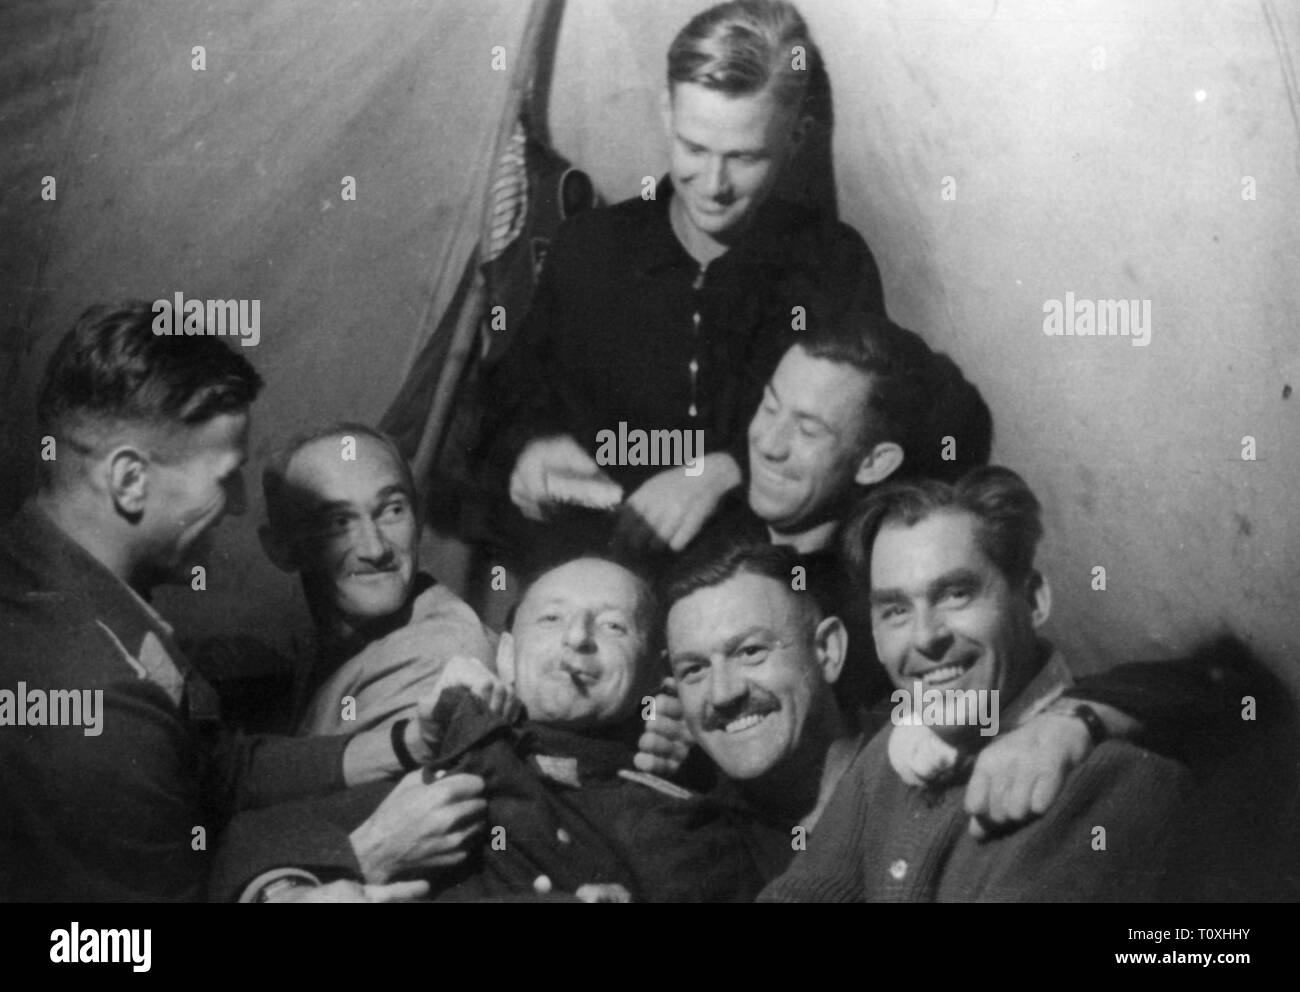 Second World War / WWII, Russia 1941, group of members of the 3rd Luftwaffe War Correspondent Company in camp, August 1941, Operation Barbarossa, eastern front, soldiers, soldier, tent, tents, cheerfulness, geniality, good mood, German Luftwaffe (German Air Force), war reporter, propaganda company, companies, propaganda corps, Wehrmacht, armed forces, people, 20th century, 1940s, second, 2nd, world war, world wars, group, groups, members, member, camp, camps, historic, historical, Additional-Rights-Clearance-Info-Not-Available Stock Photo